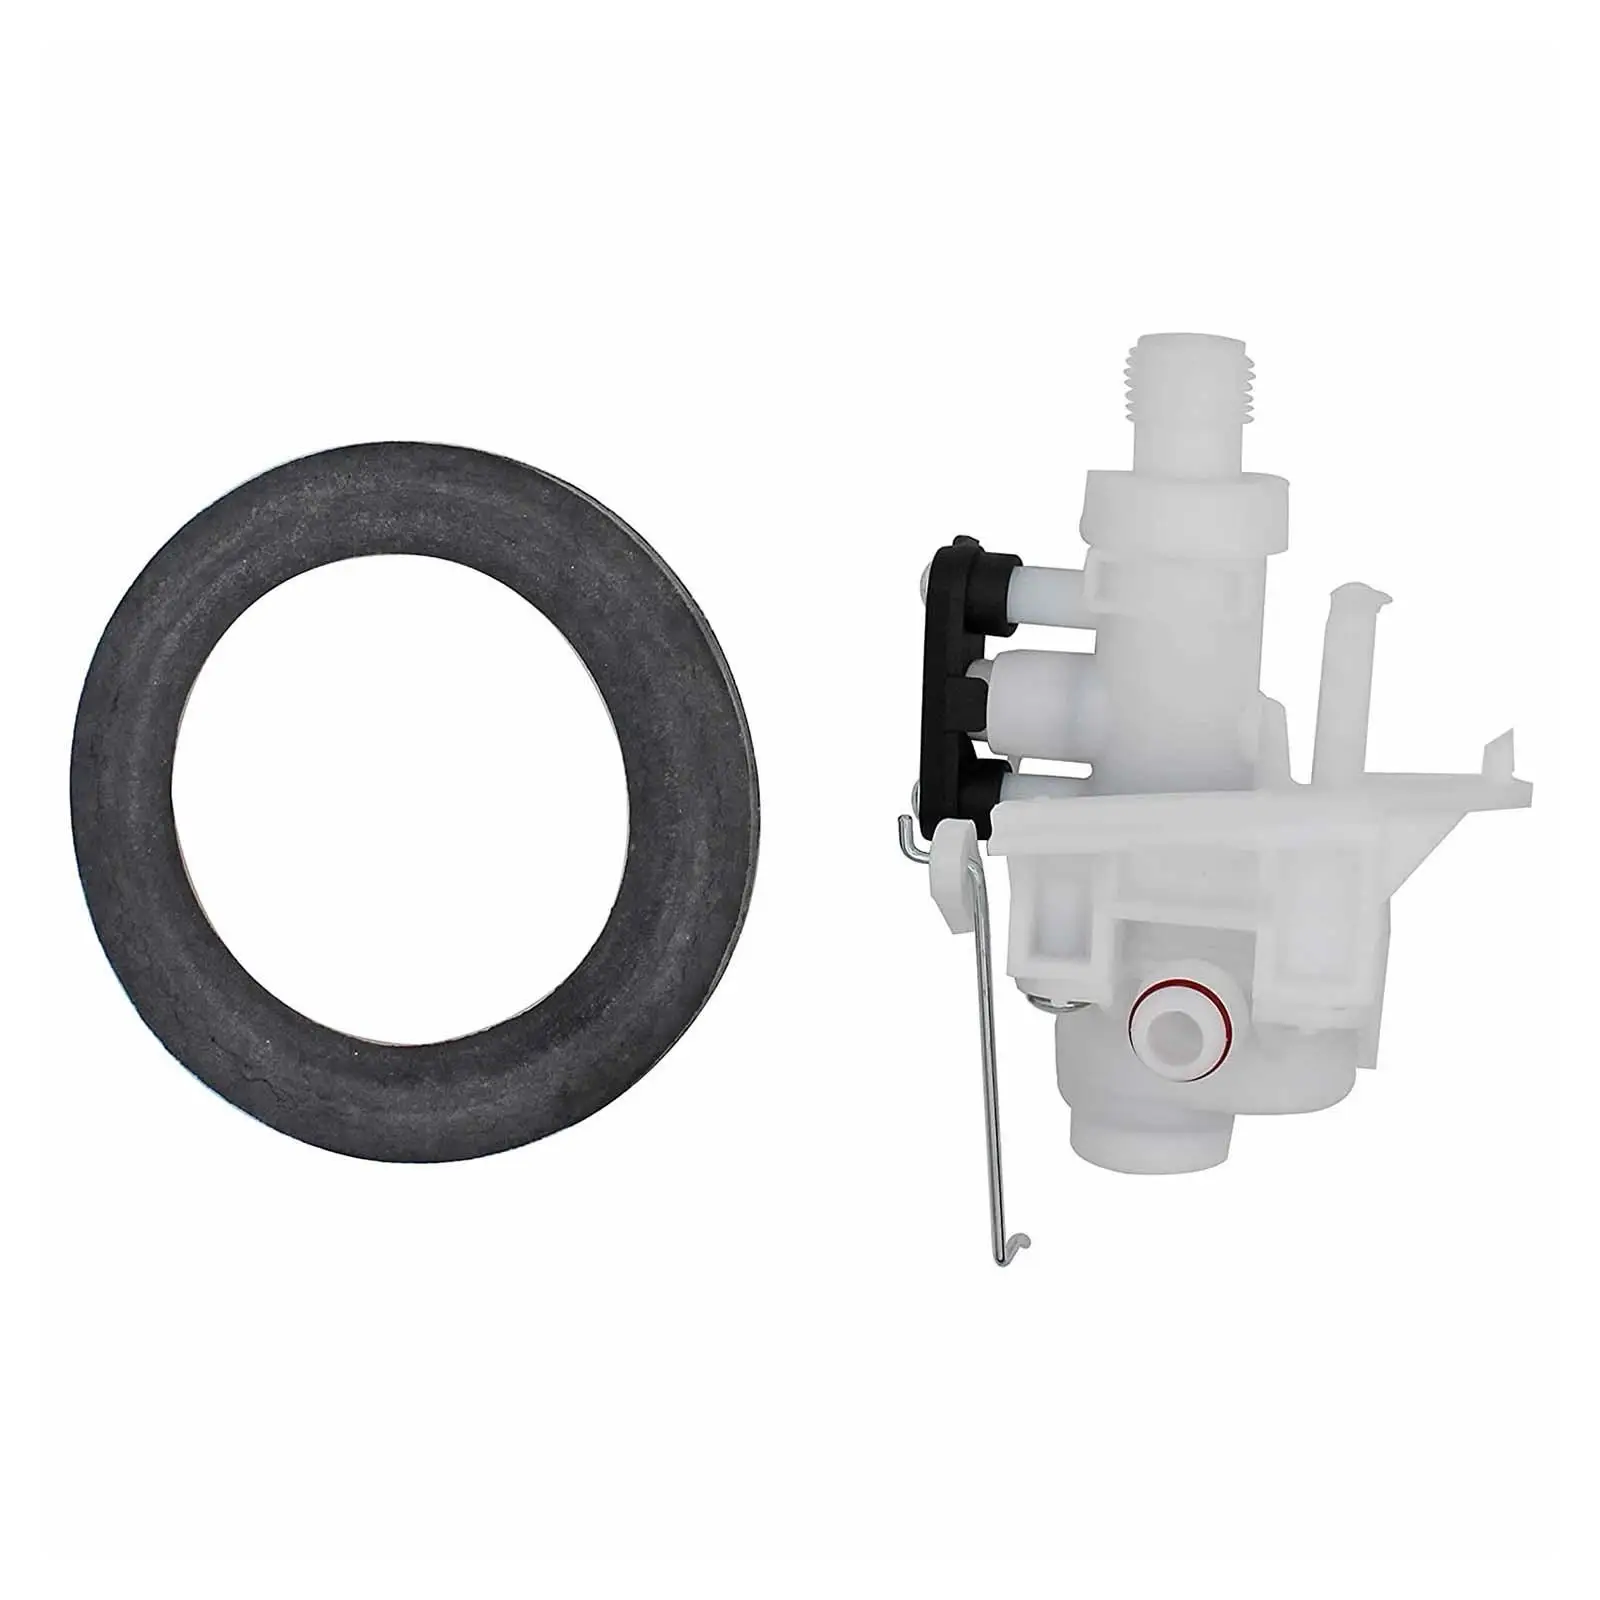 31705 RV Water Valve Professional Convenient Upgraded Easy to Install RV Toilet Valve with Seal for campers Motor Home Replace